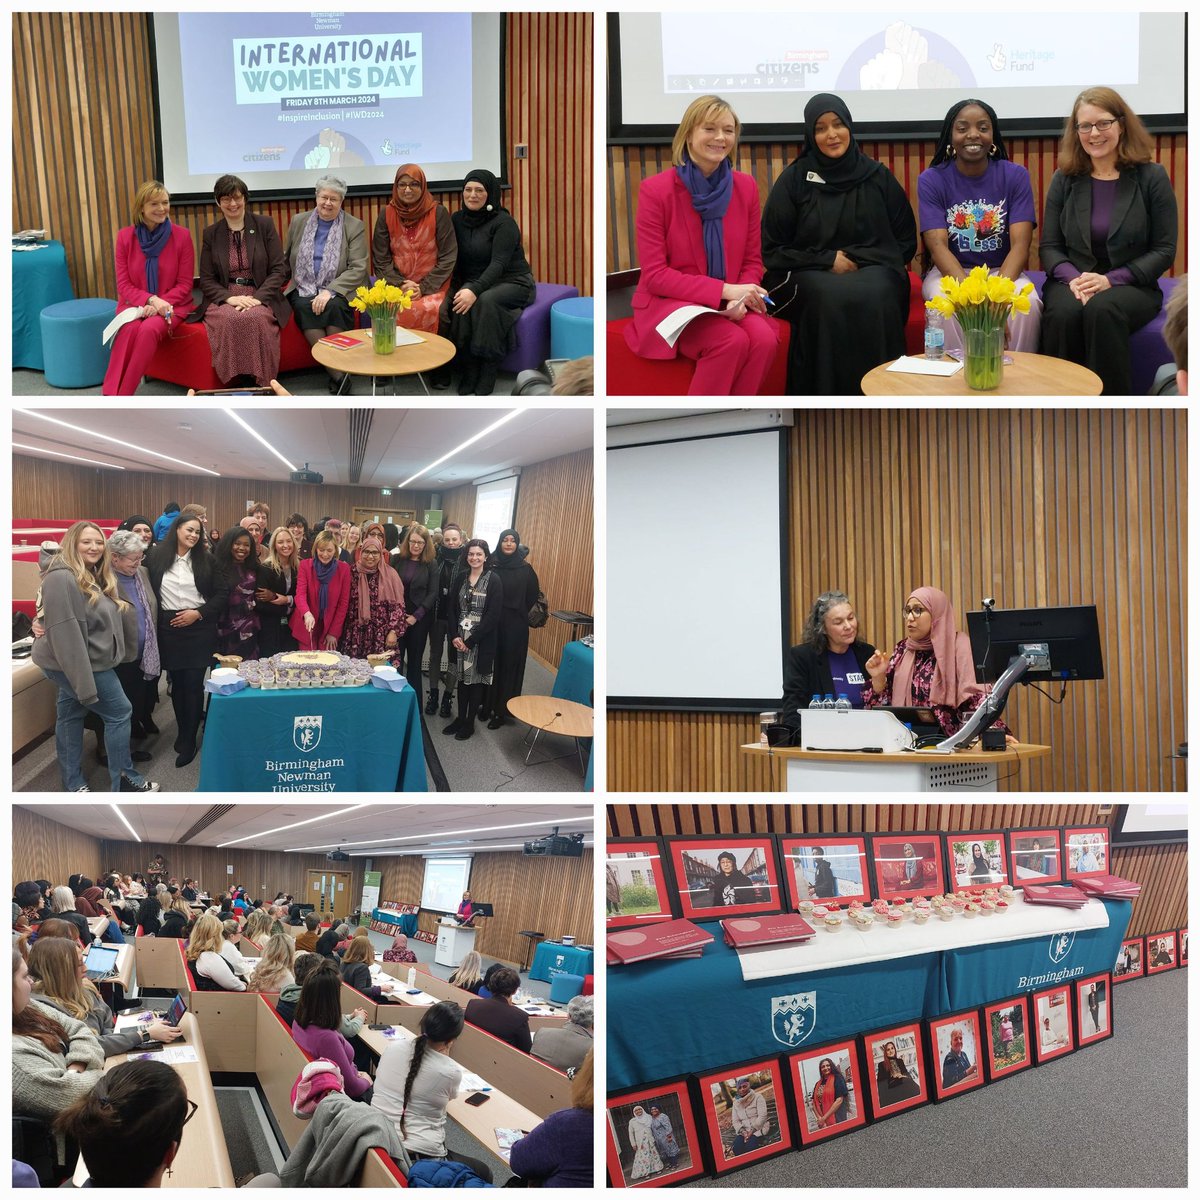 @Newman_Uni @julie_etch Reflecting on an excellent #IWD2024 action yesterday with powerful stories of women in leadership from across civil society in Birmingham. Building hope through action for our city during tough times.